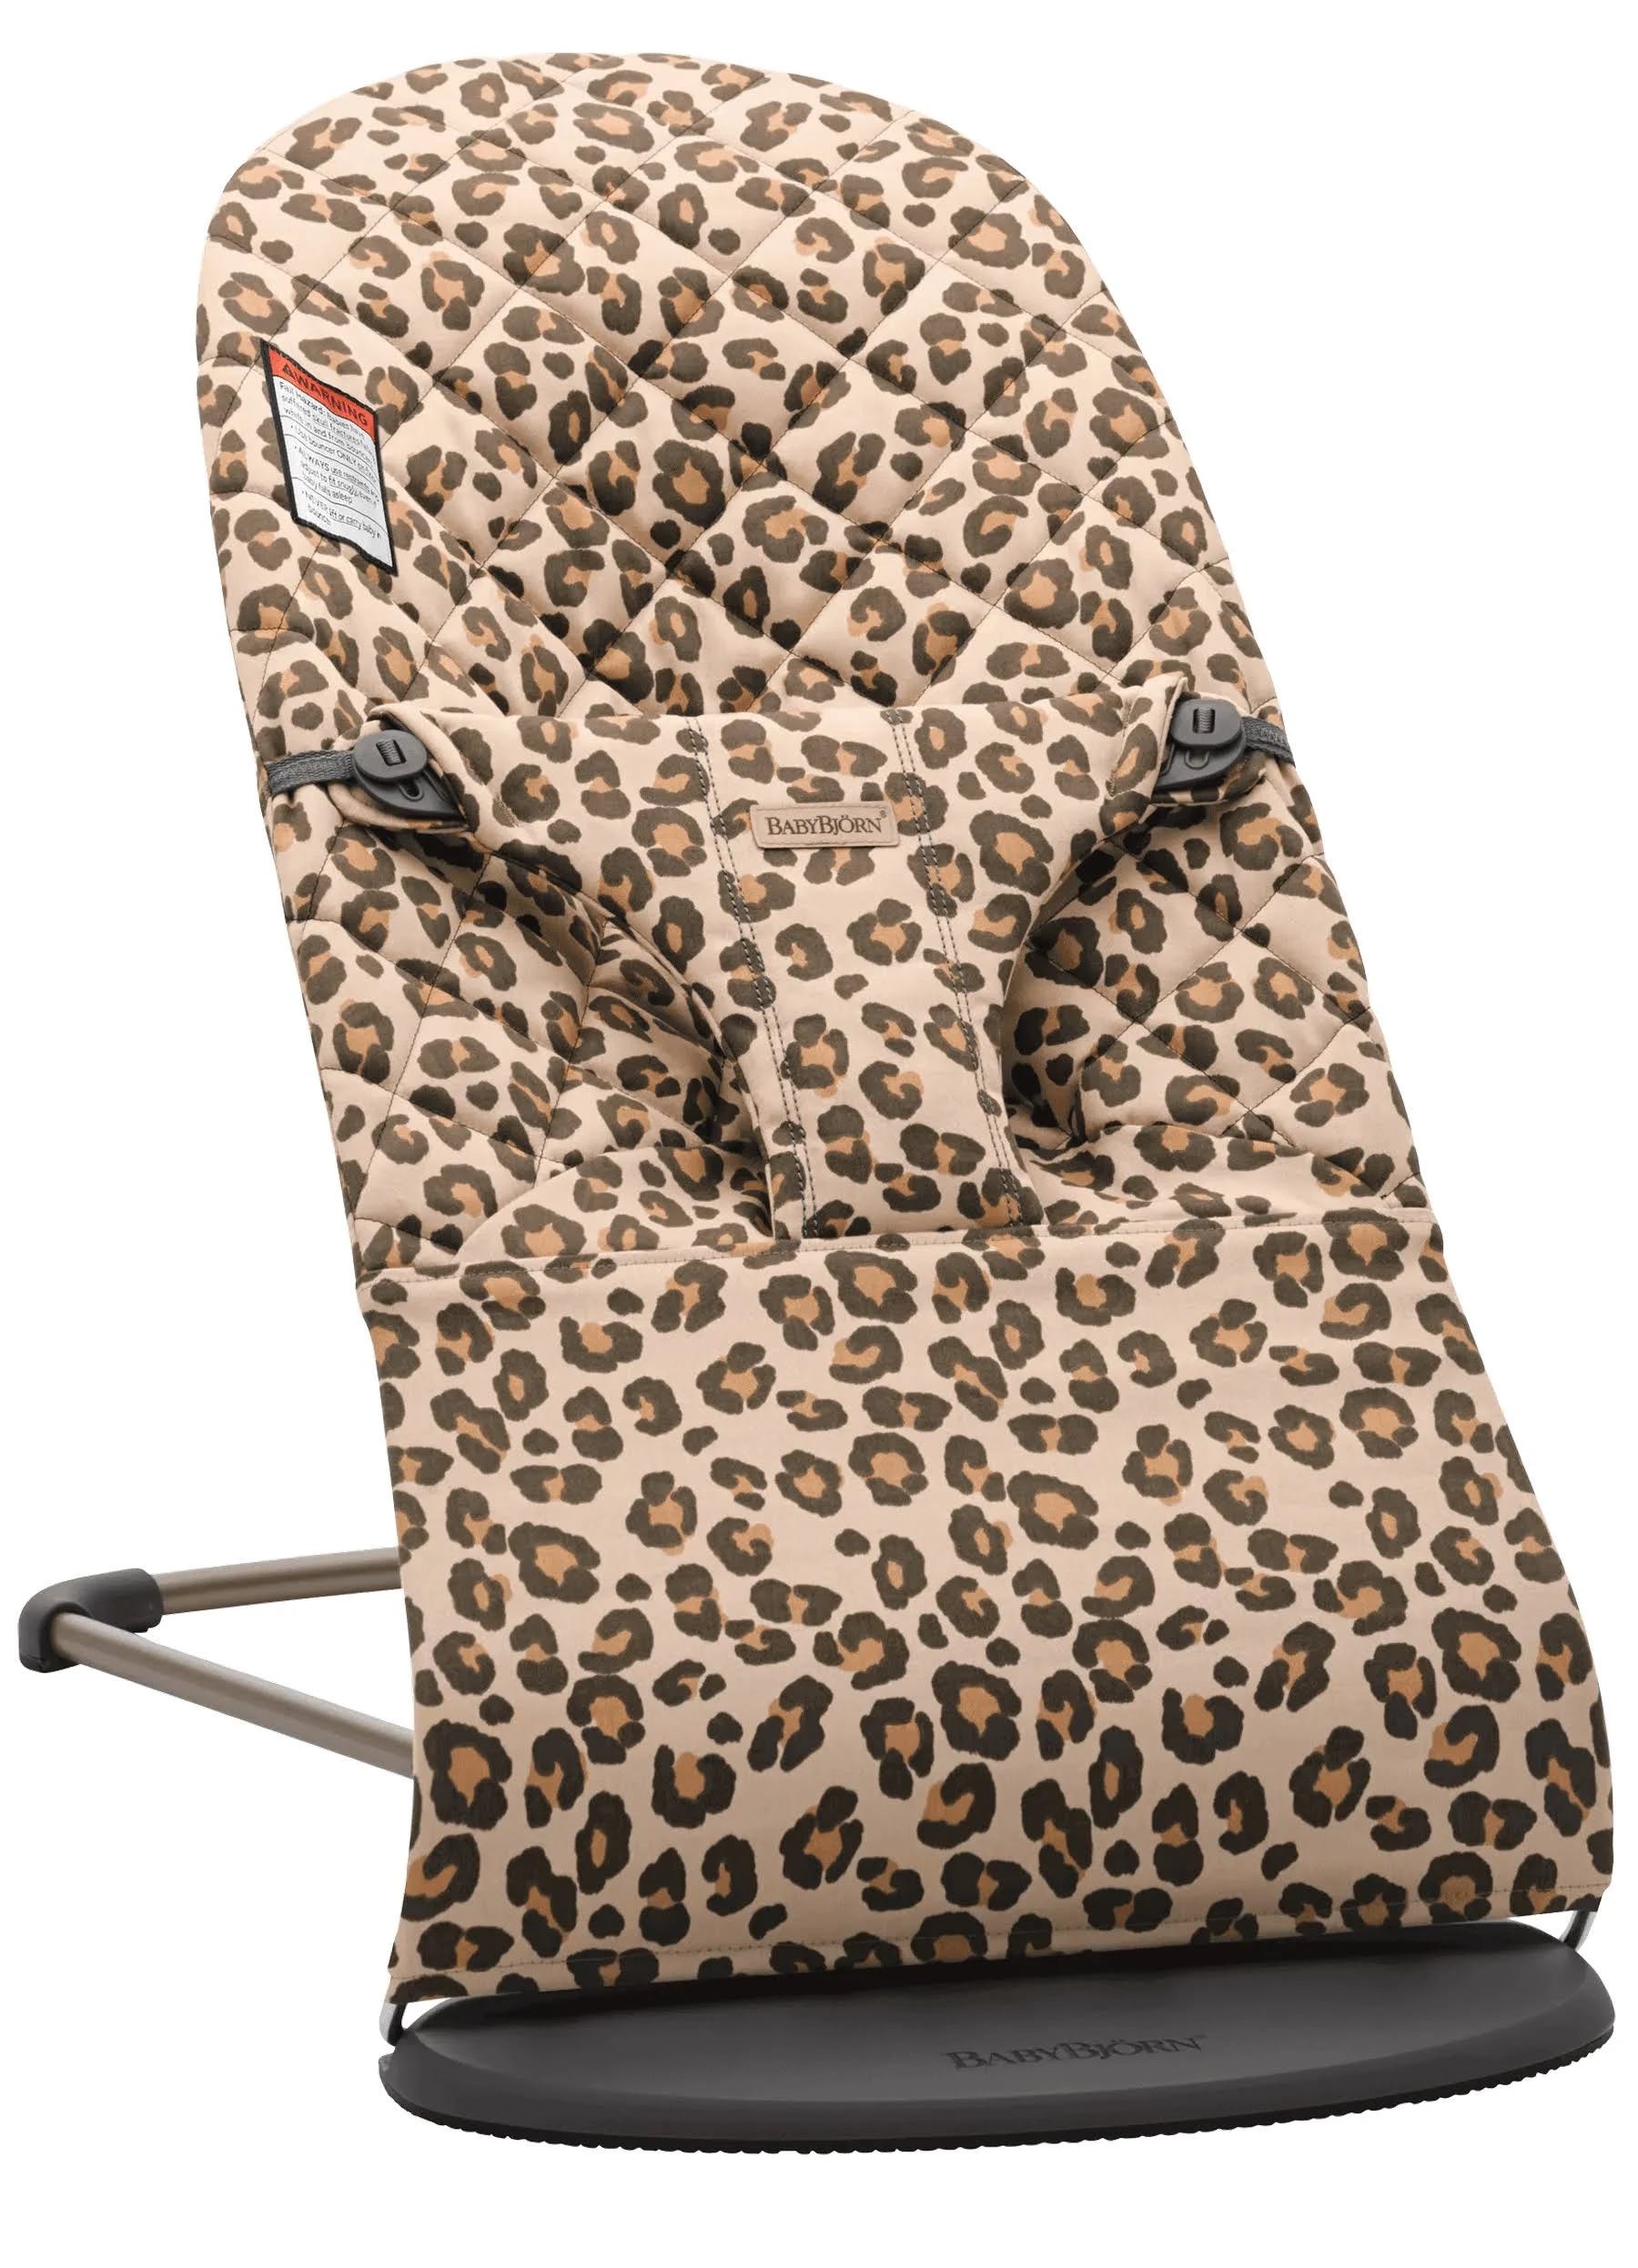 BabyBjorn Bouncer Bliss: Luxurious Beige and Leopard Print Cotton Bouncer | Image